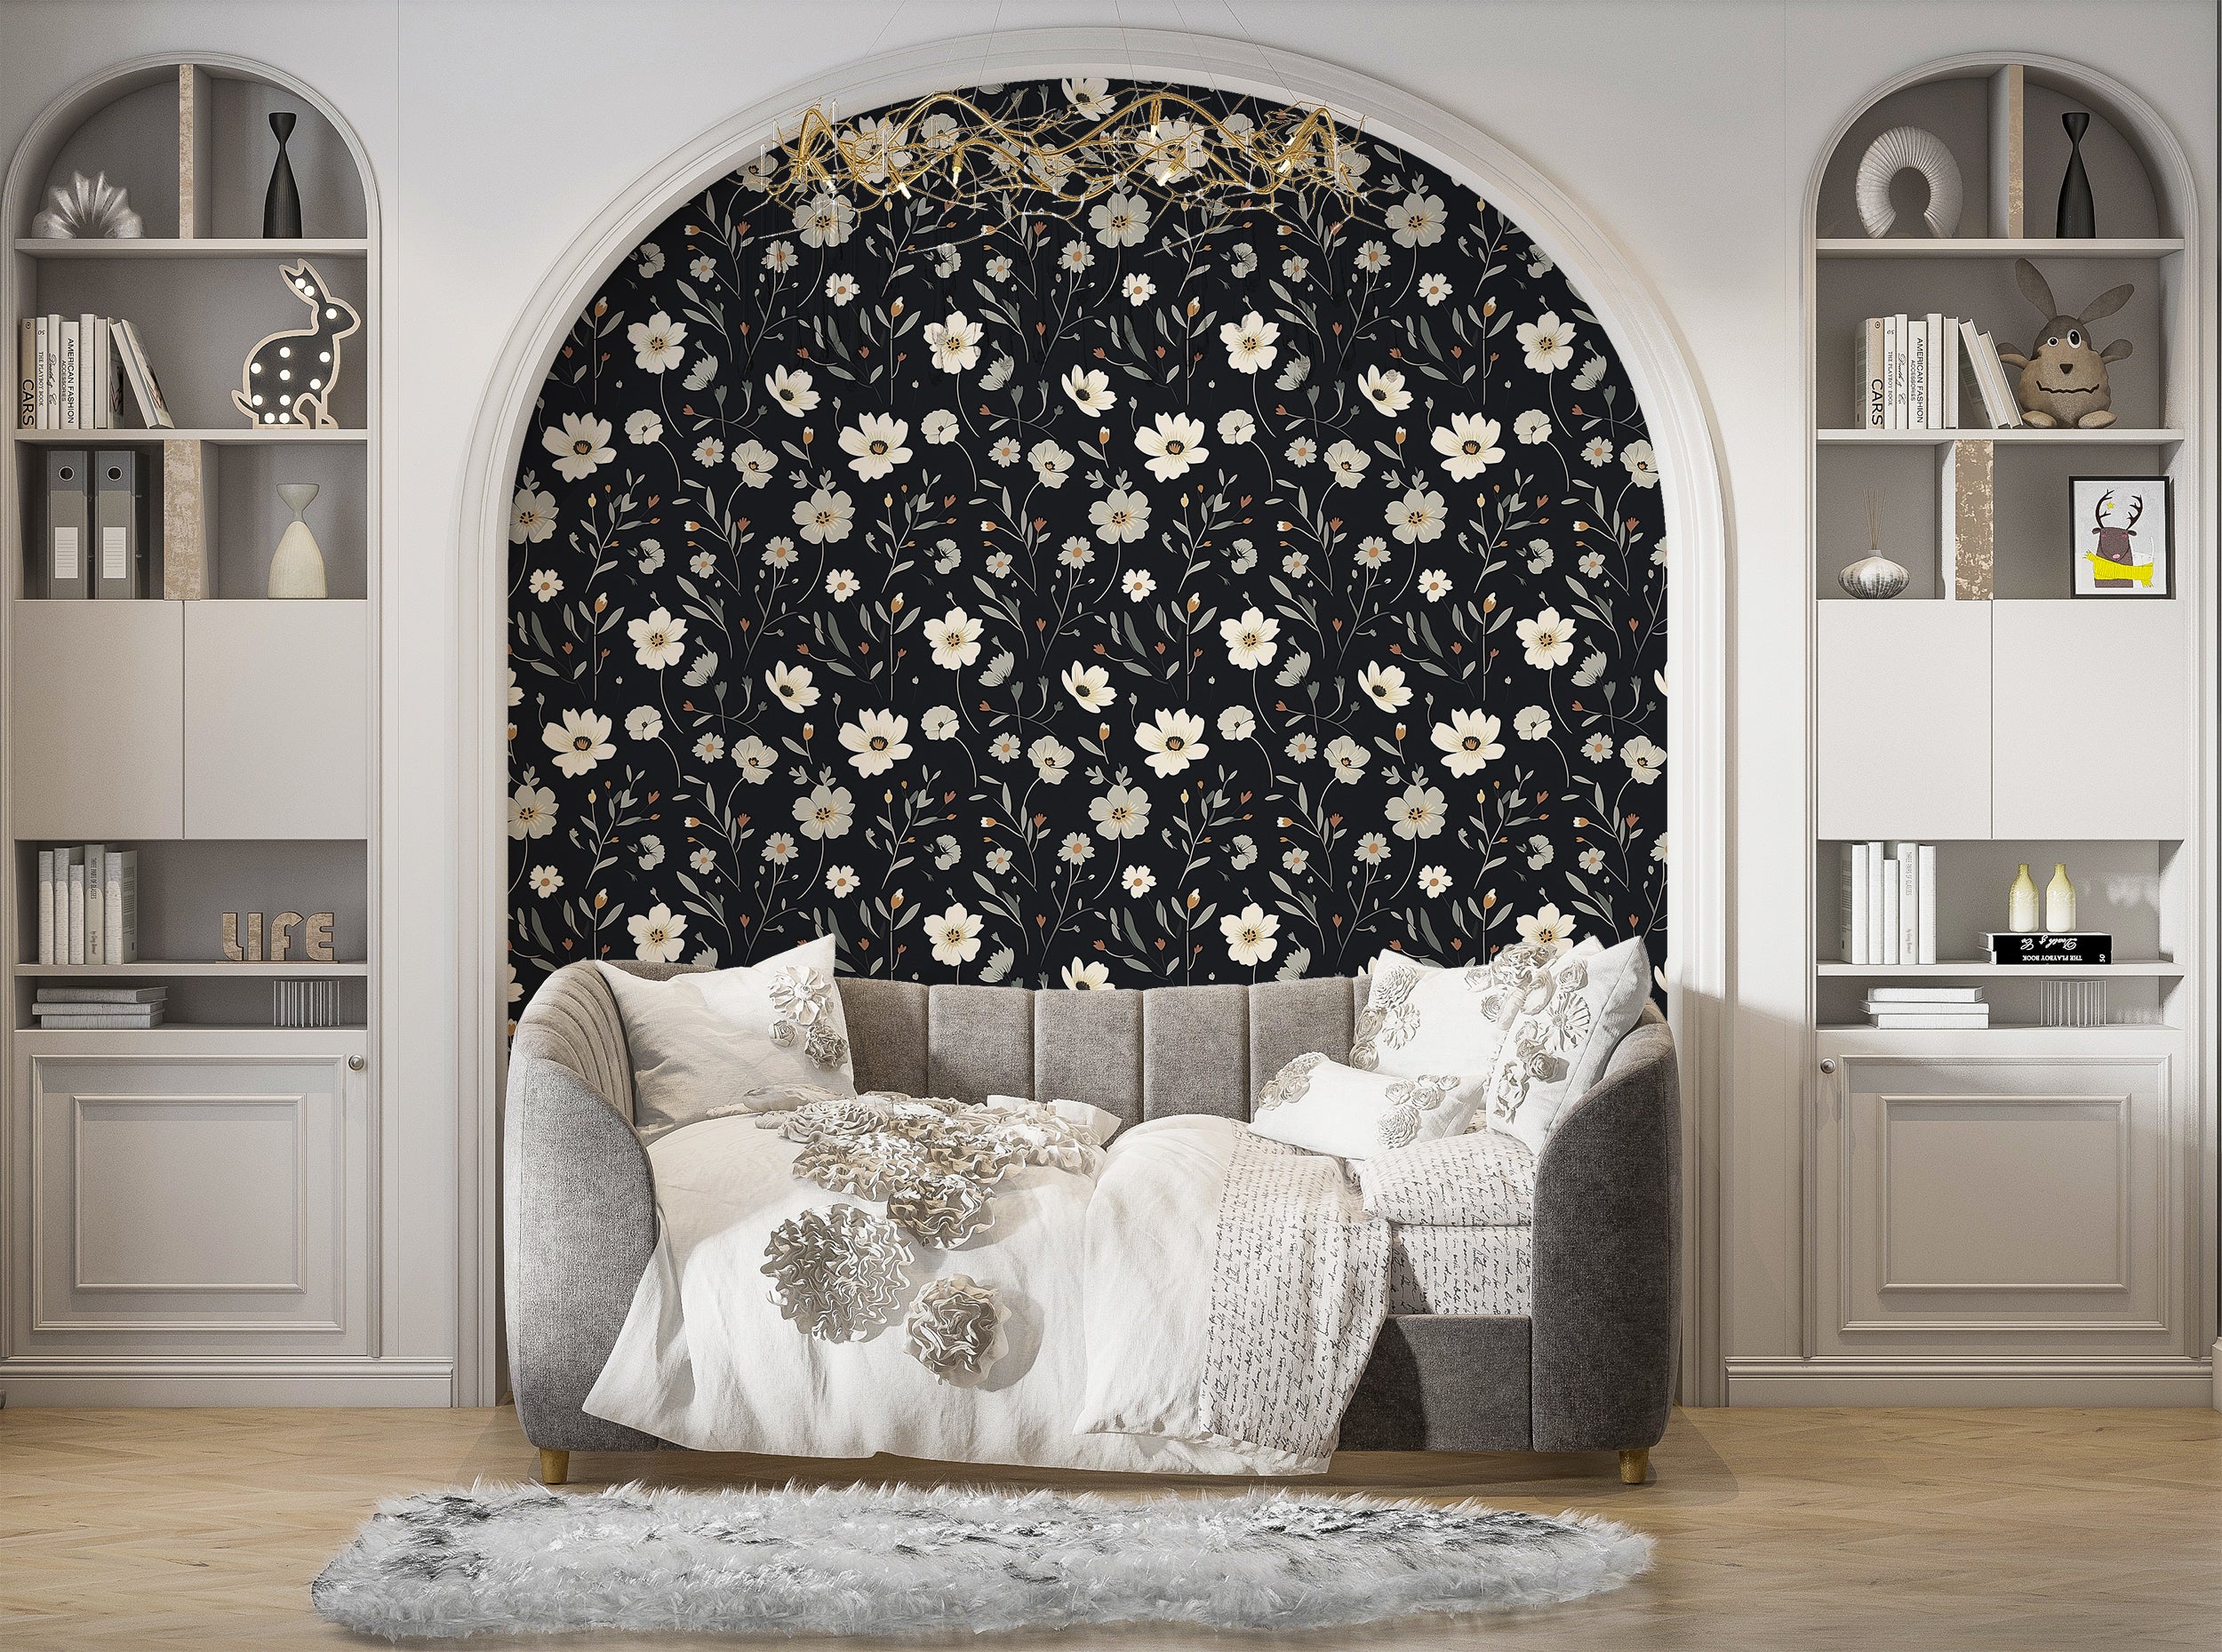 Captivating Black and White Flower Wall Covering